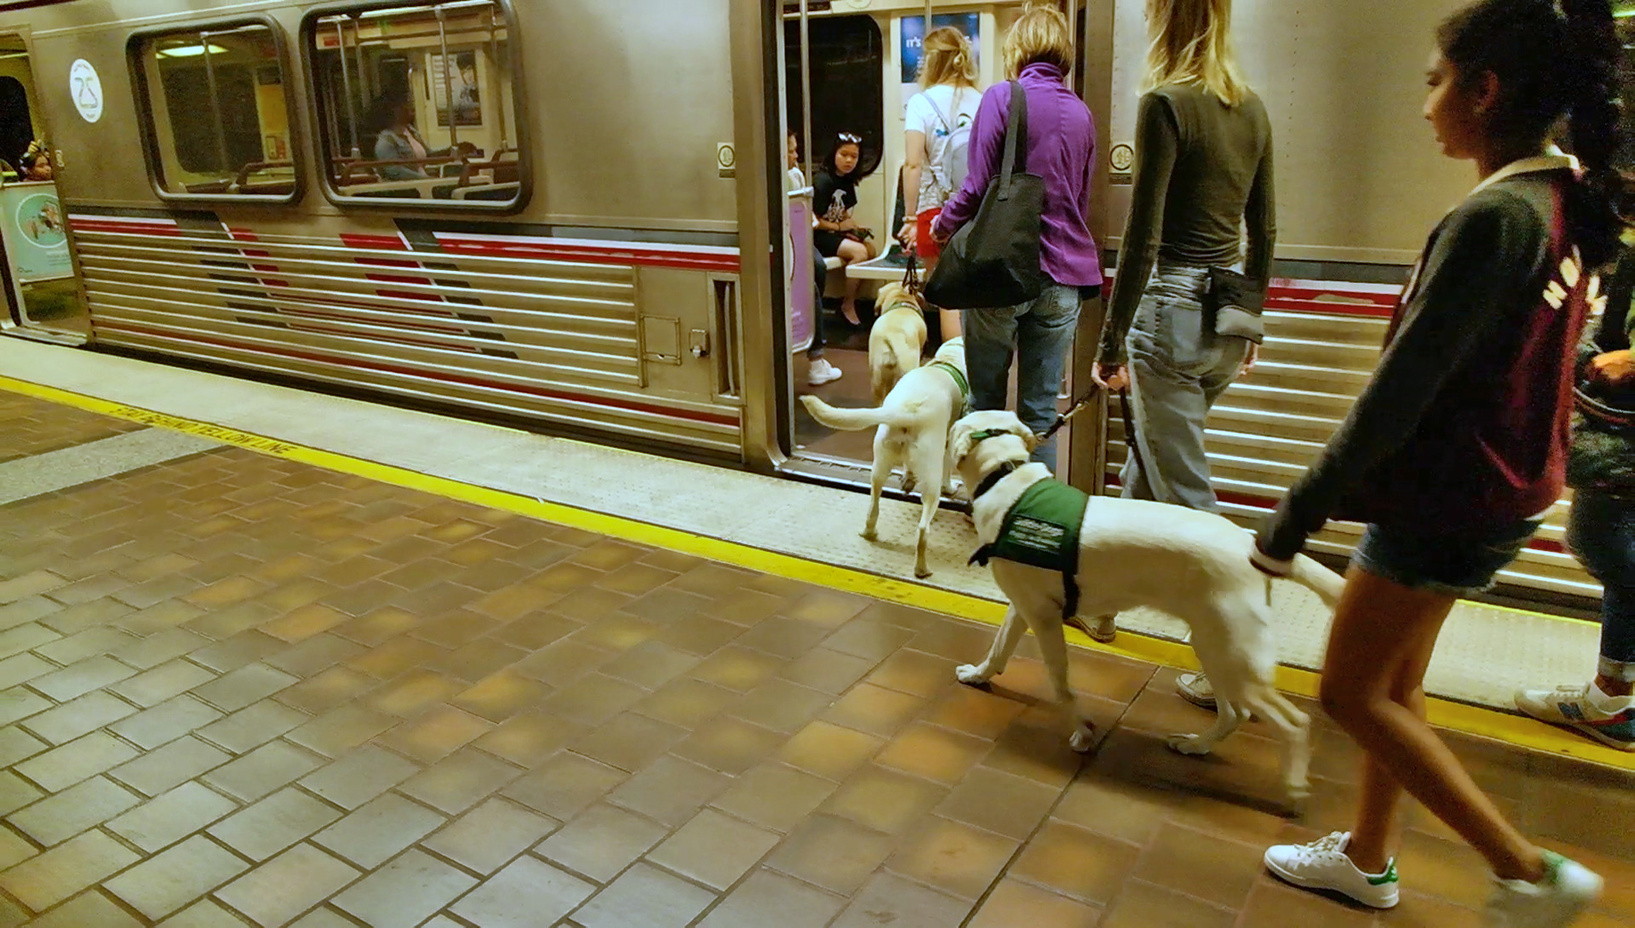 LASW Travel Day, our pups ride the Metro rail to Olvera St.